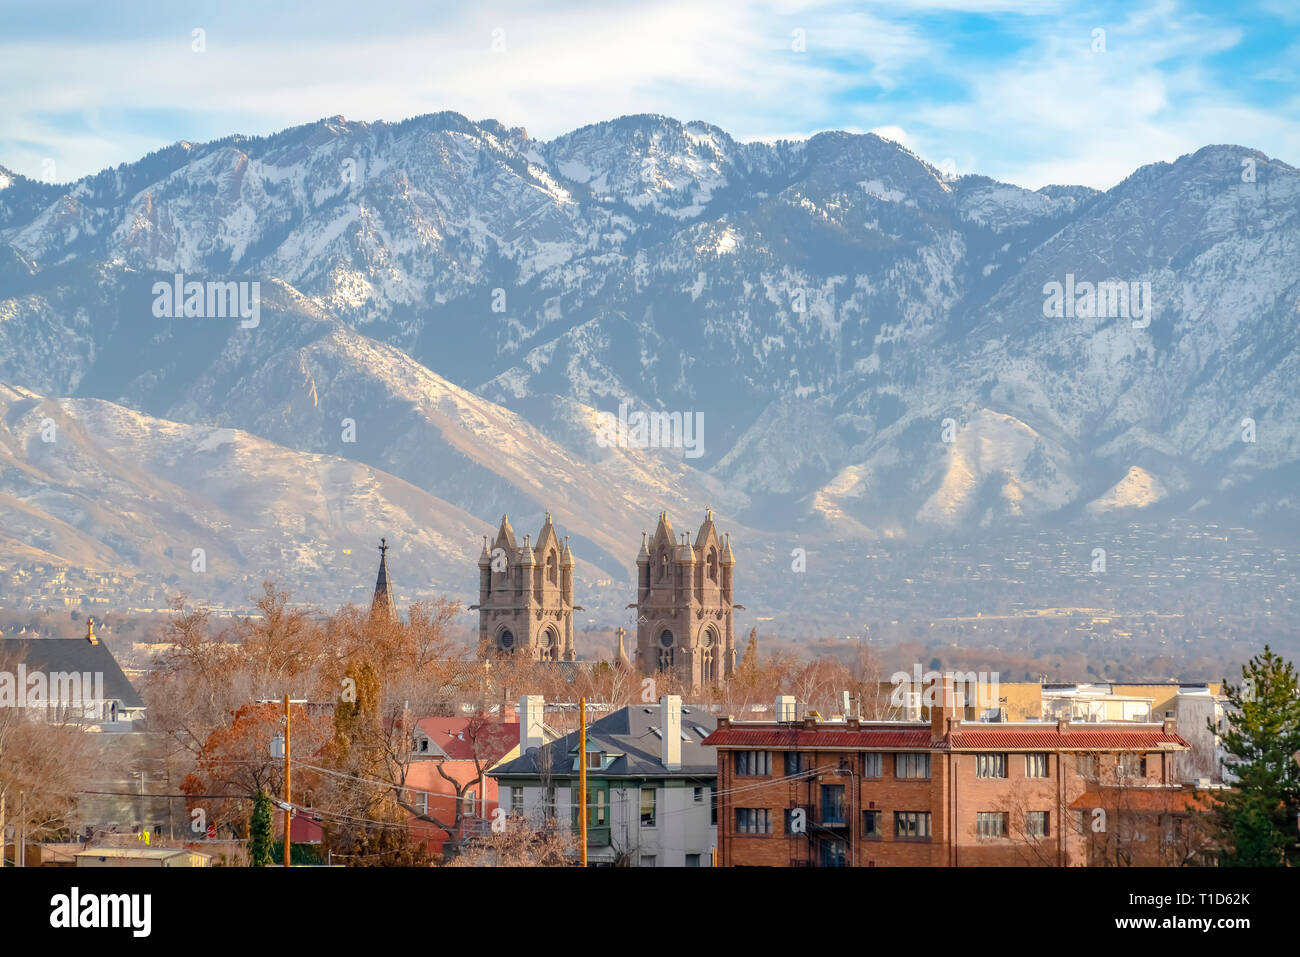 Cathedral of the Madeleine and Wasatch Mountain. Cathedral of the Madeleine towering over buildings in Salt Lake City, Utah. The immense Wasatch Mount Stock Photo